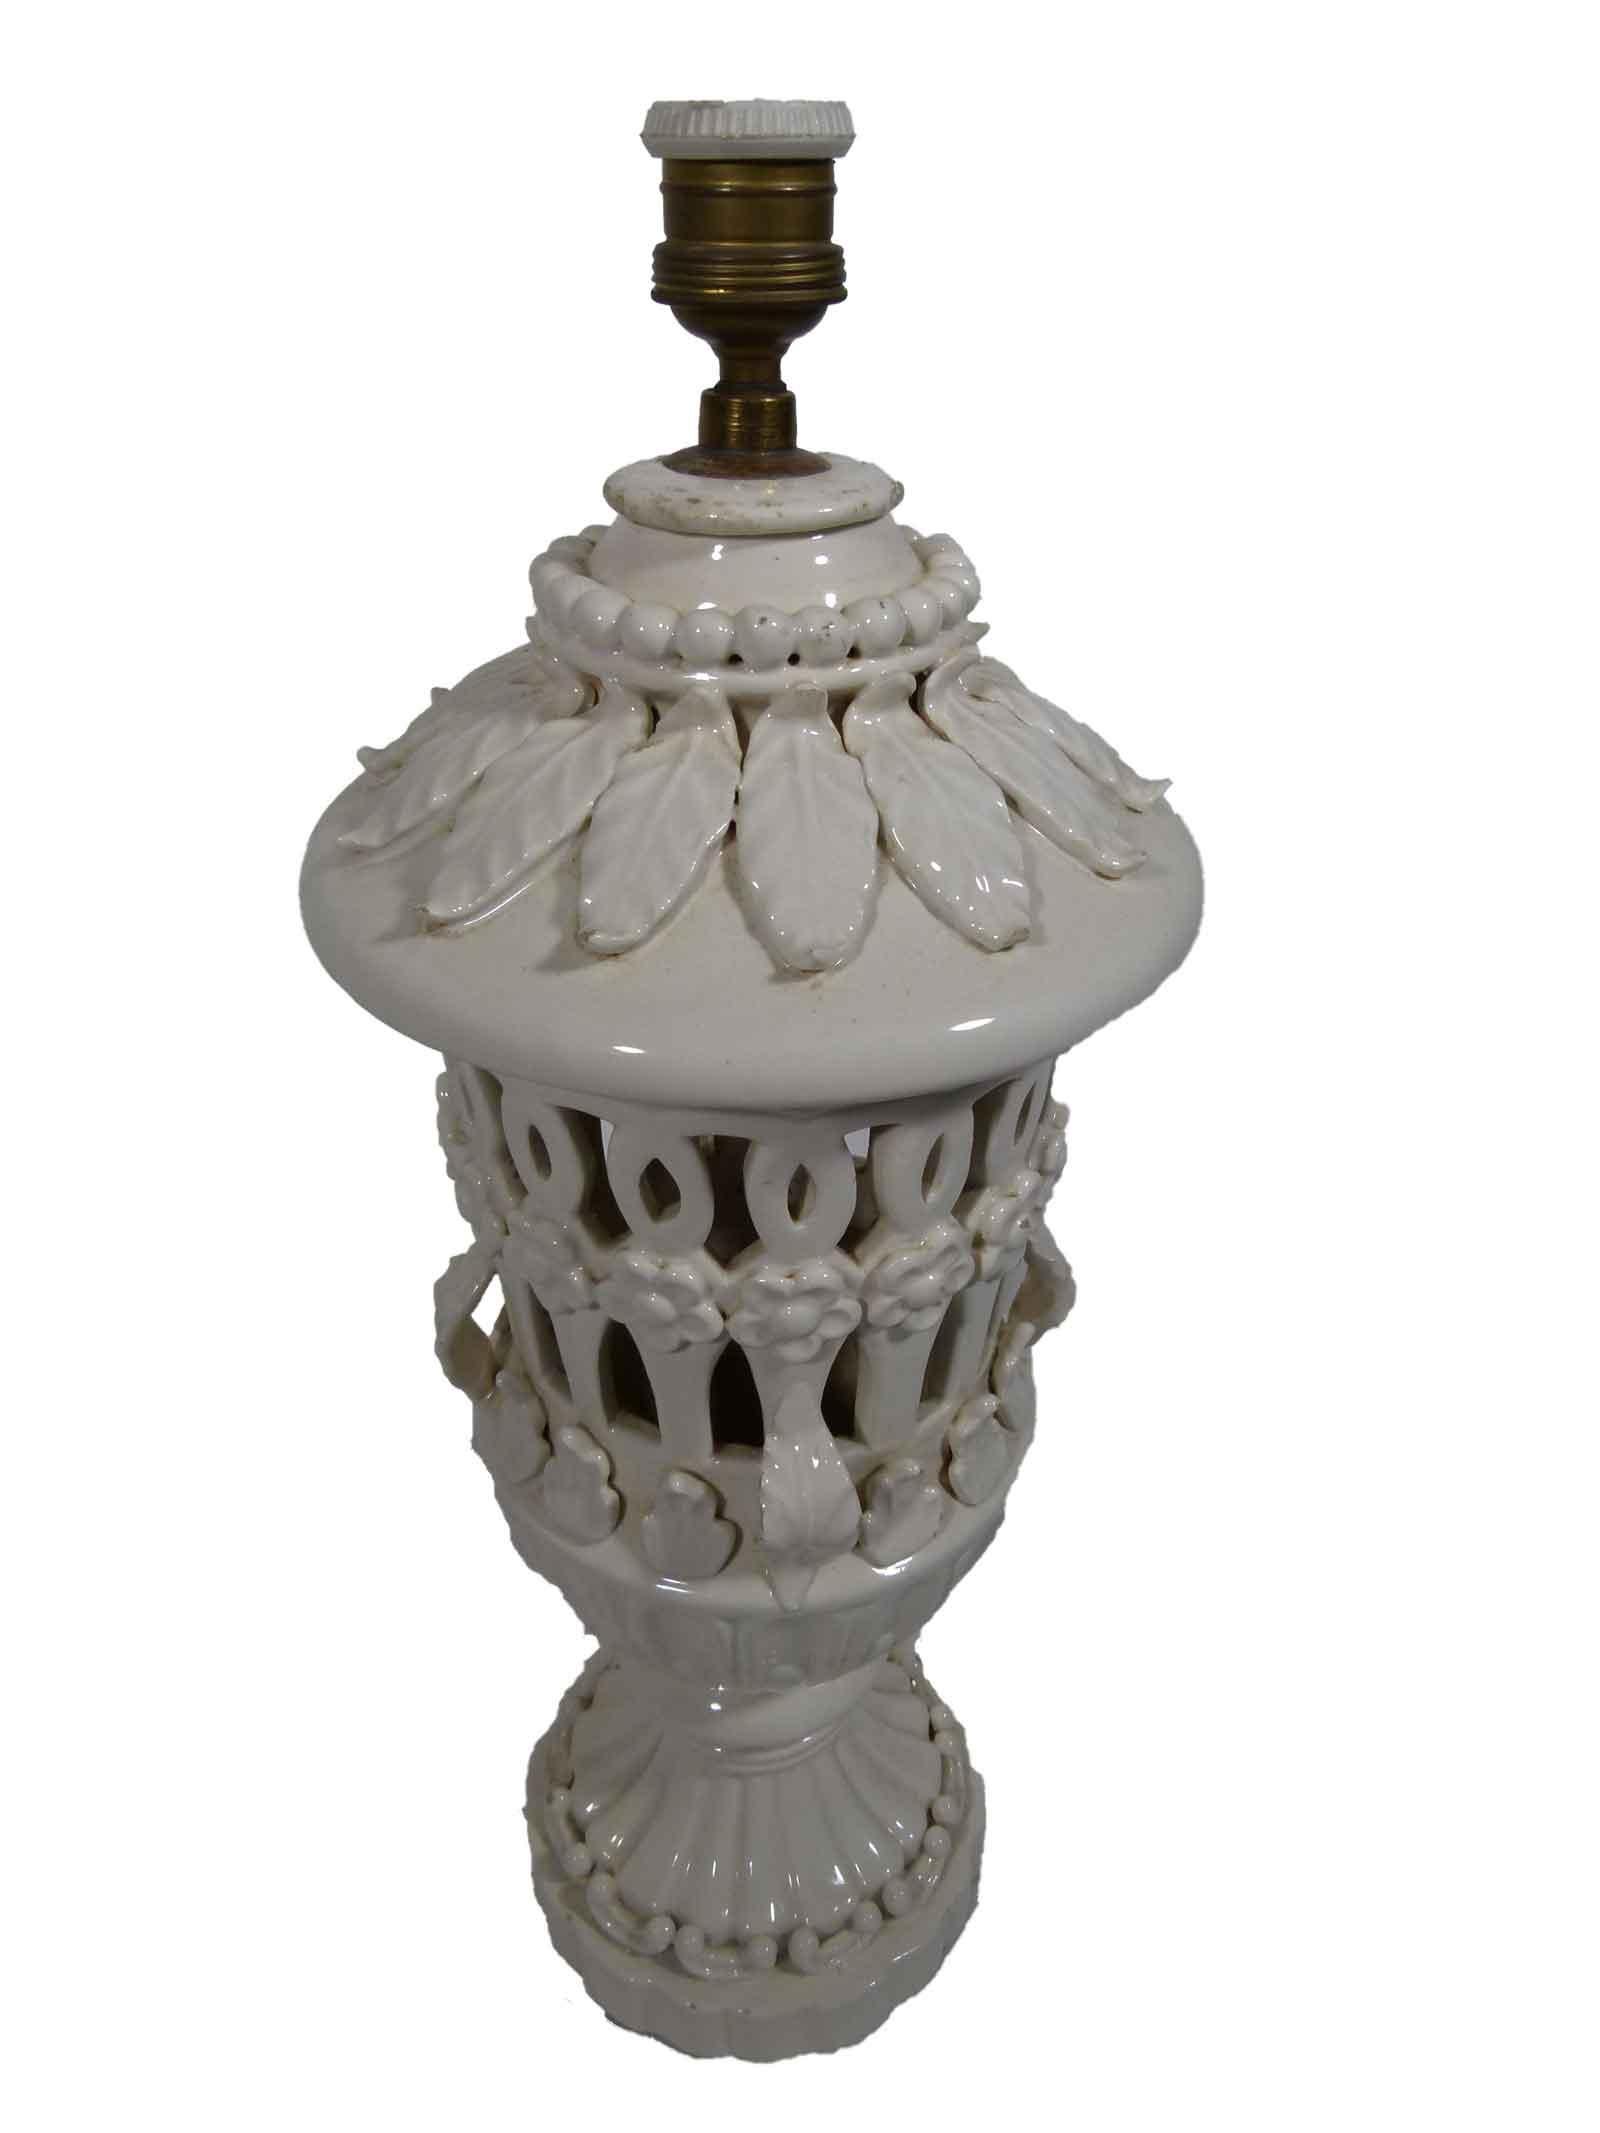 Early 20th century Menices White Porcelain Table Lamp- A wonderful art nouveau style lamp, decorated with nature images